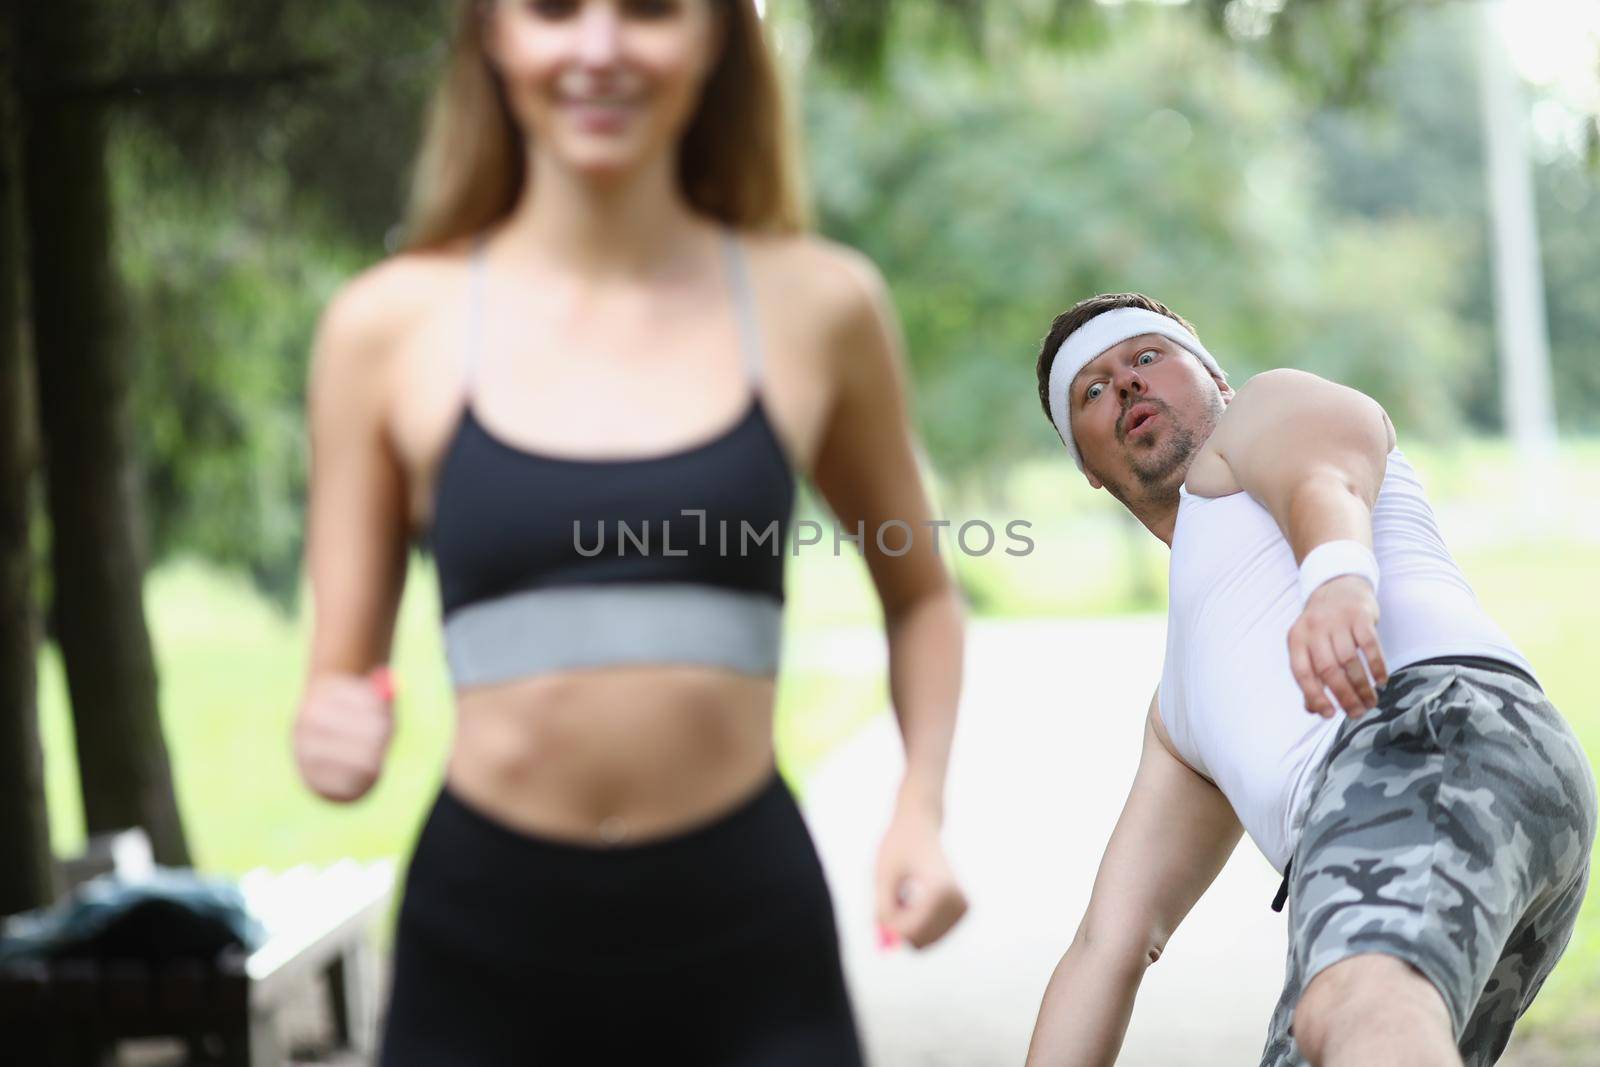 Portrait of tired sweaty middle aged man fall from beauty of young woman. Active woman jogging in front, feeling energetic. Sport, healthy habit concept